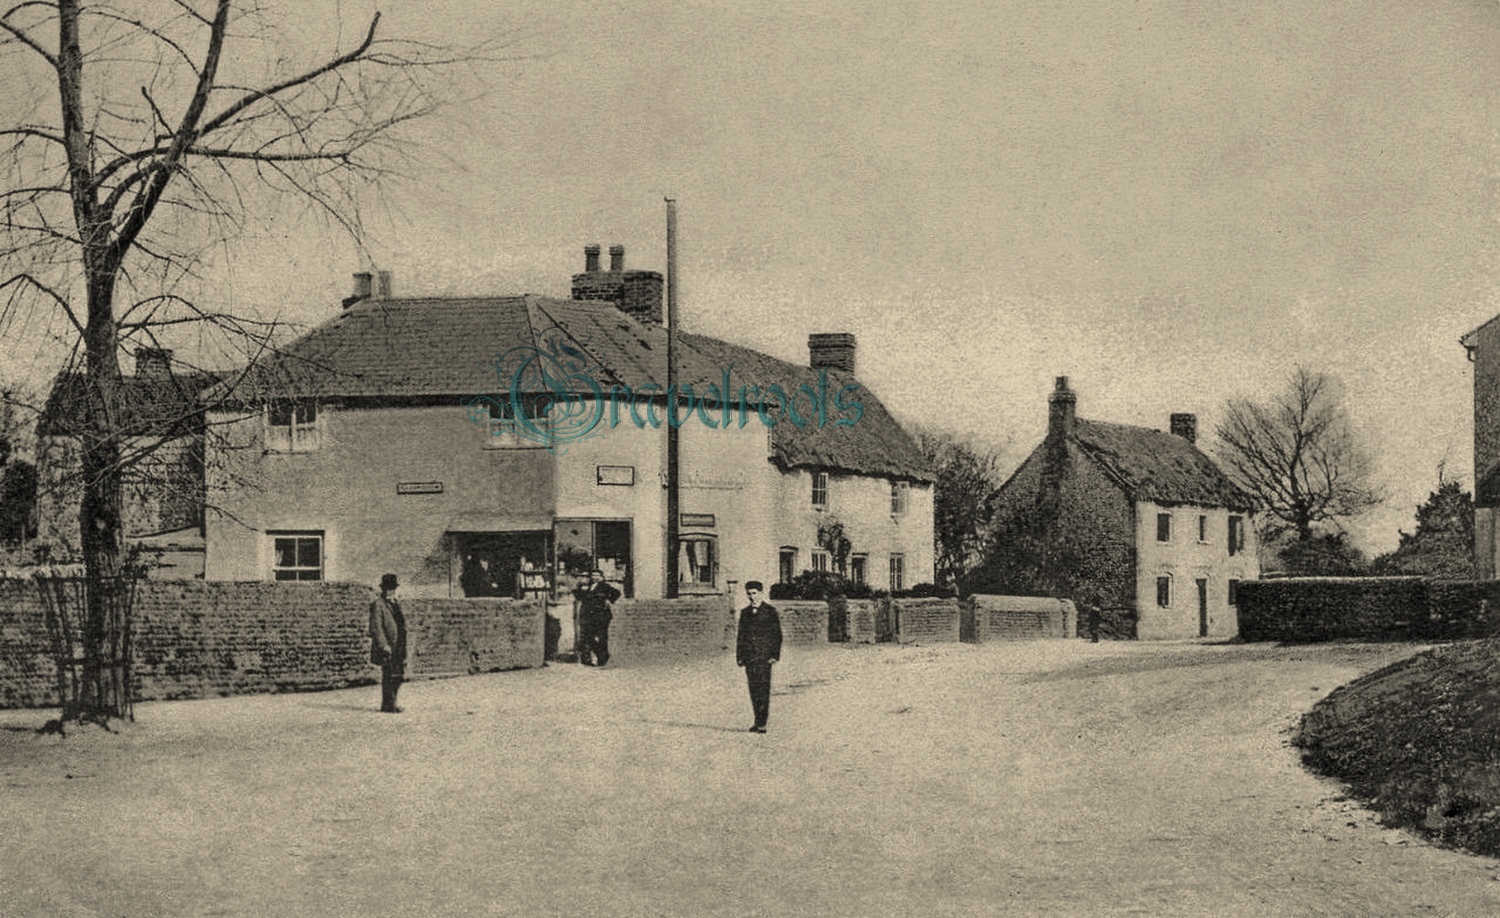 Post Office, Yapton, Sussex - click image to return